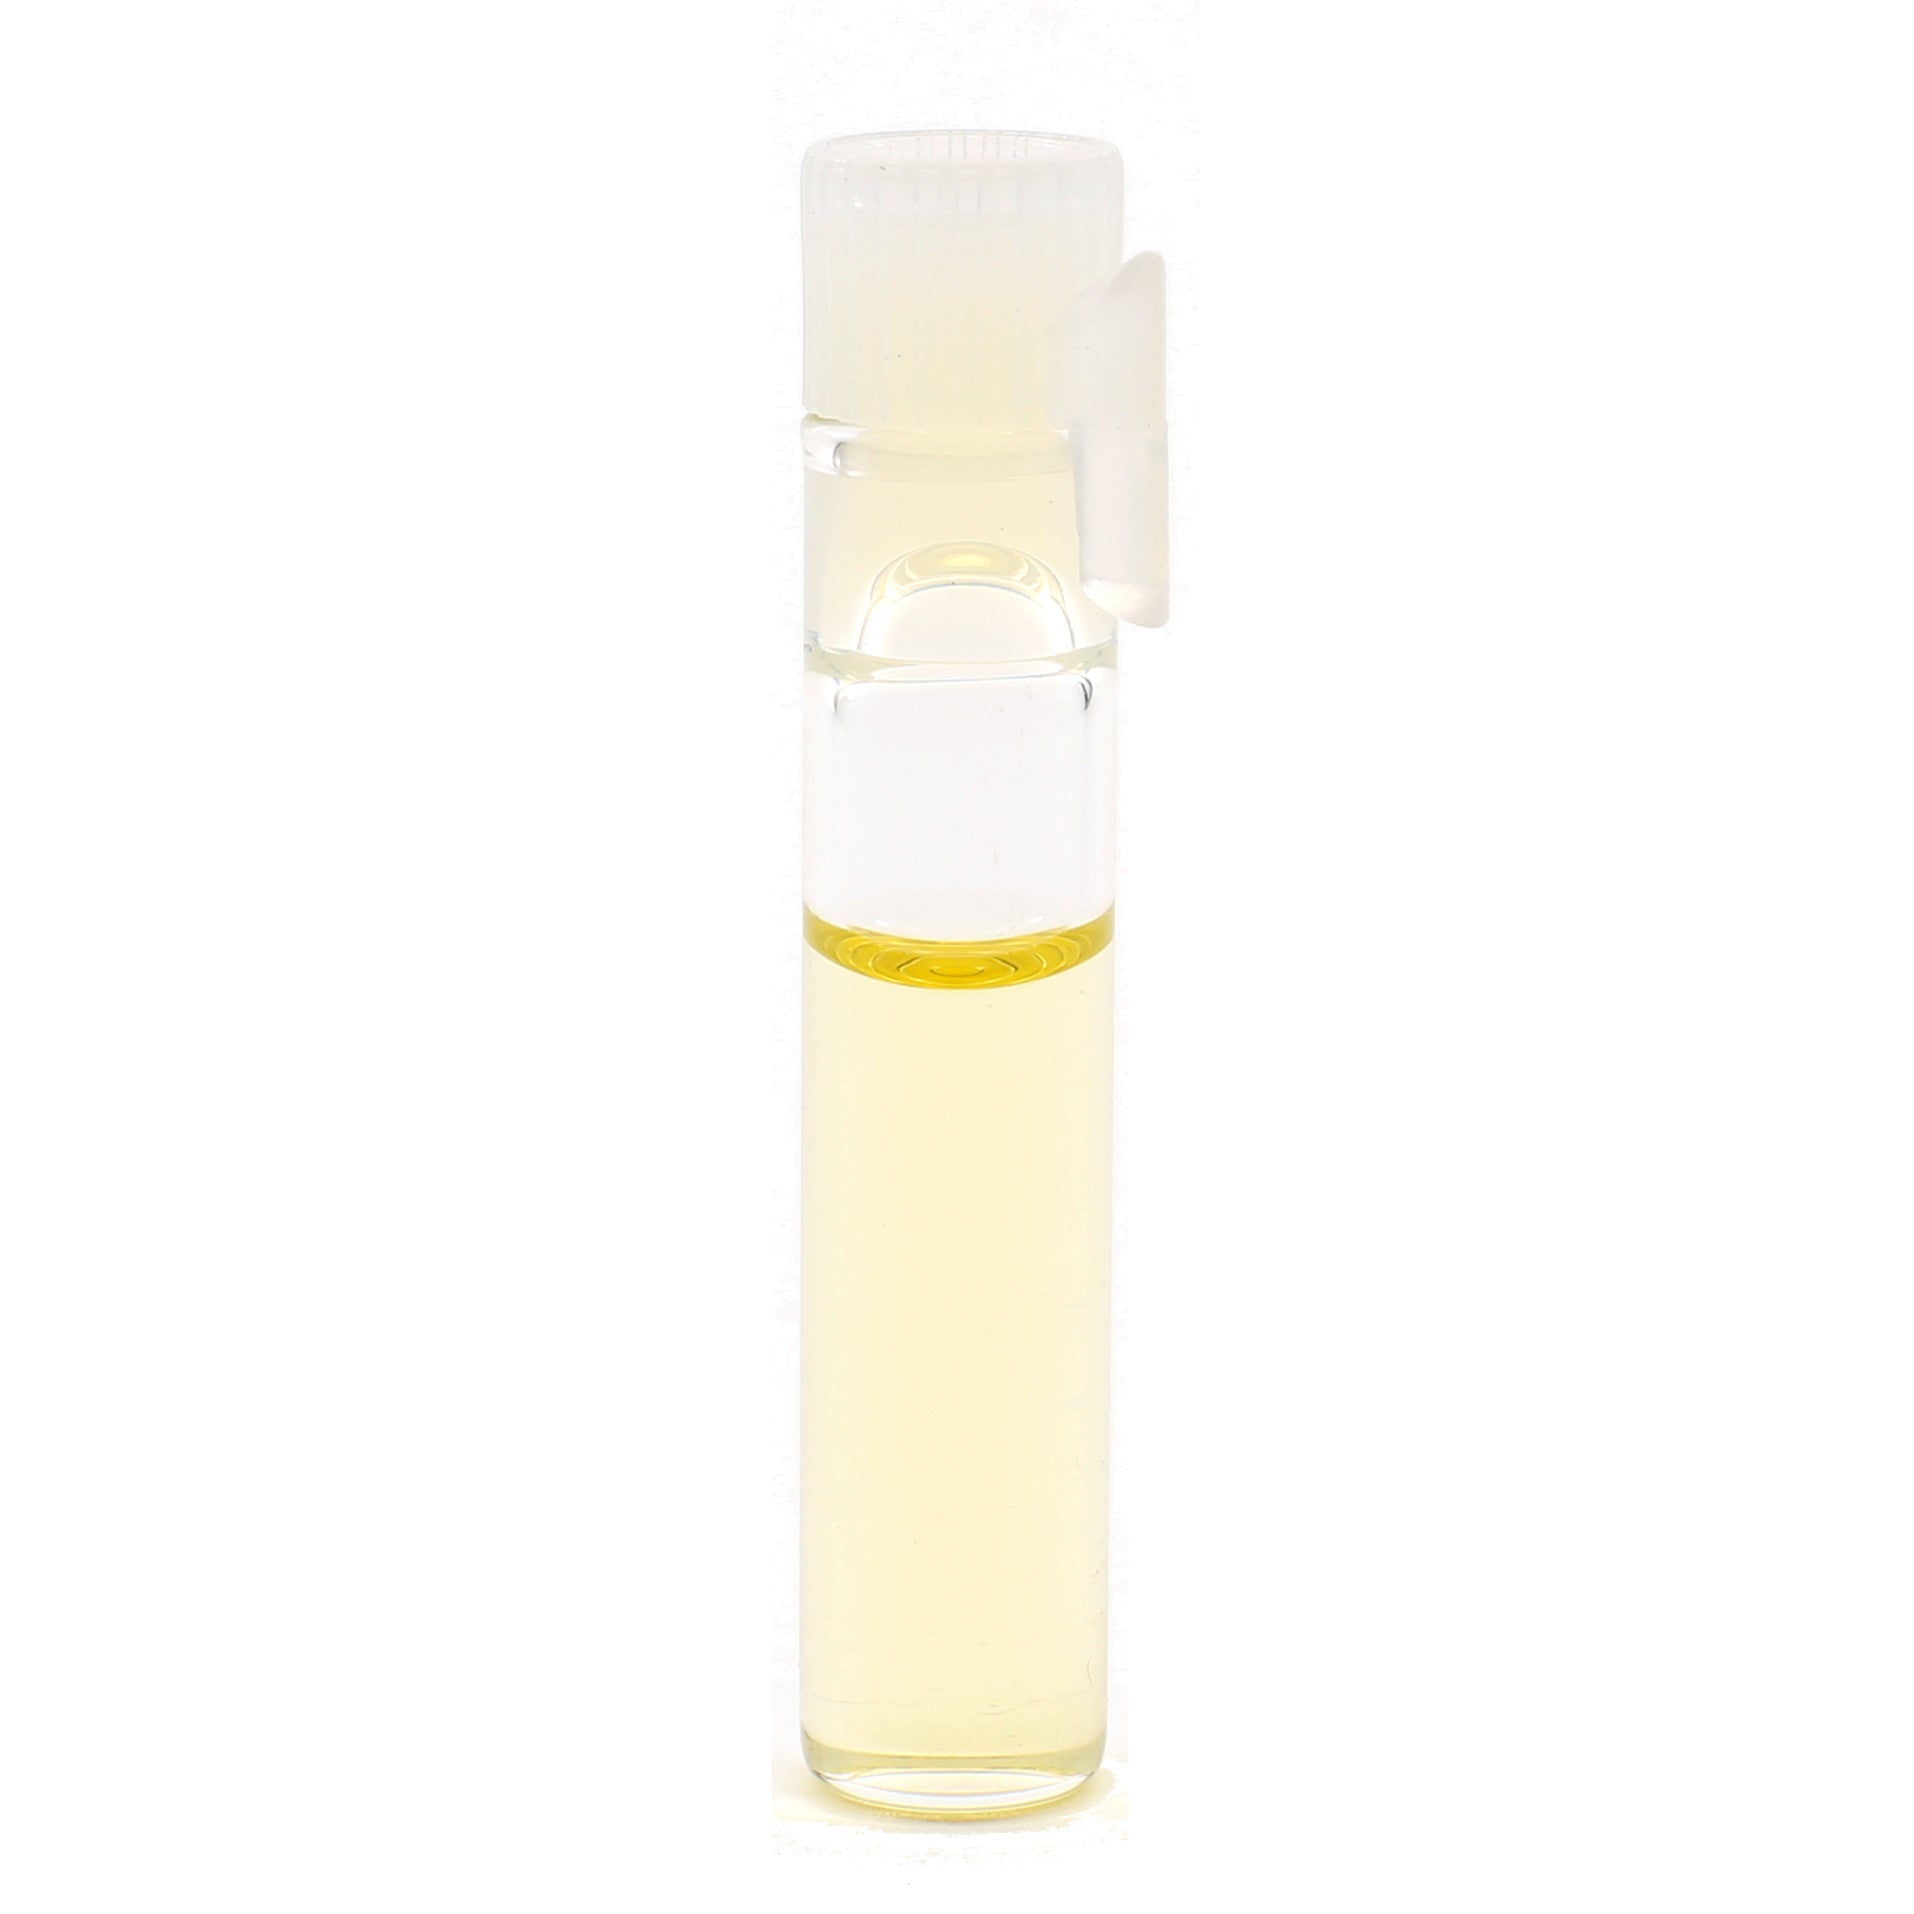 EDP Cologne - 1 ml Sample - Wet Shaving Products